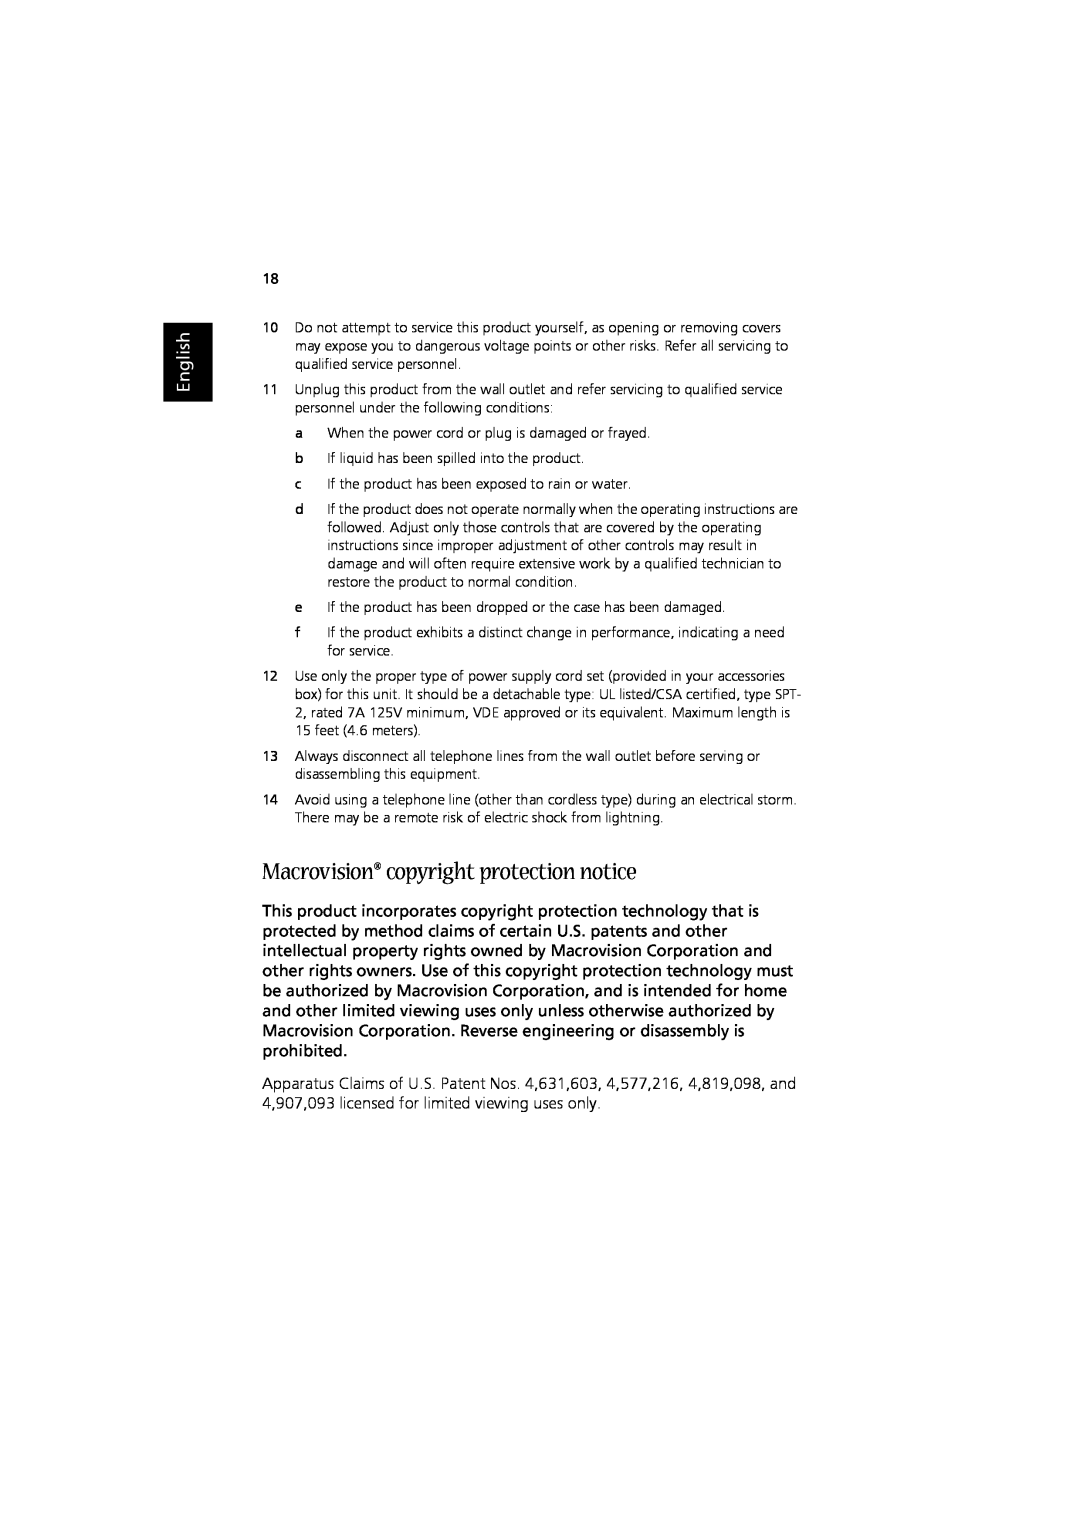 Acer RC810 manual Macrovision copyright protection notice, English 